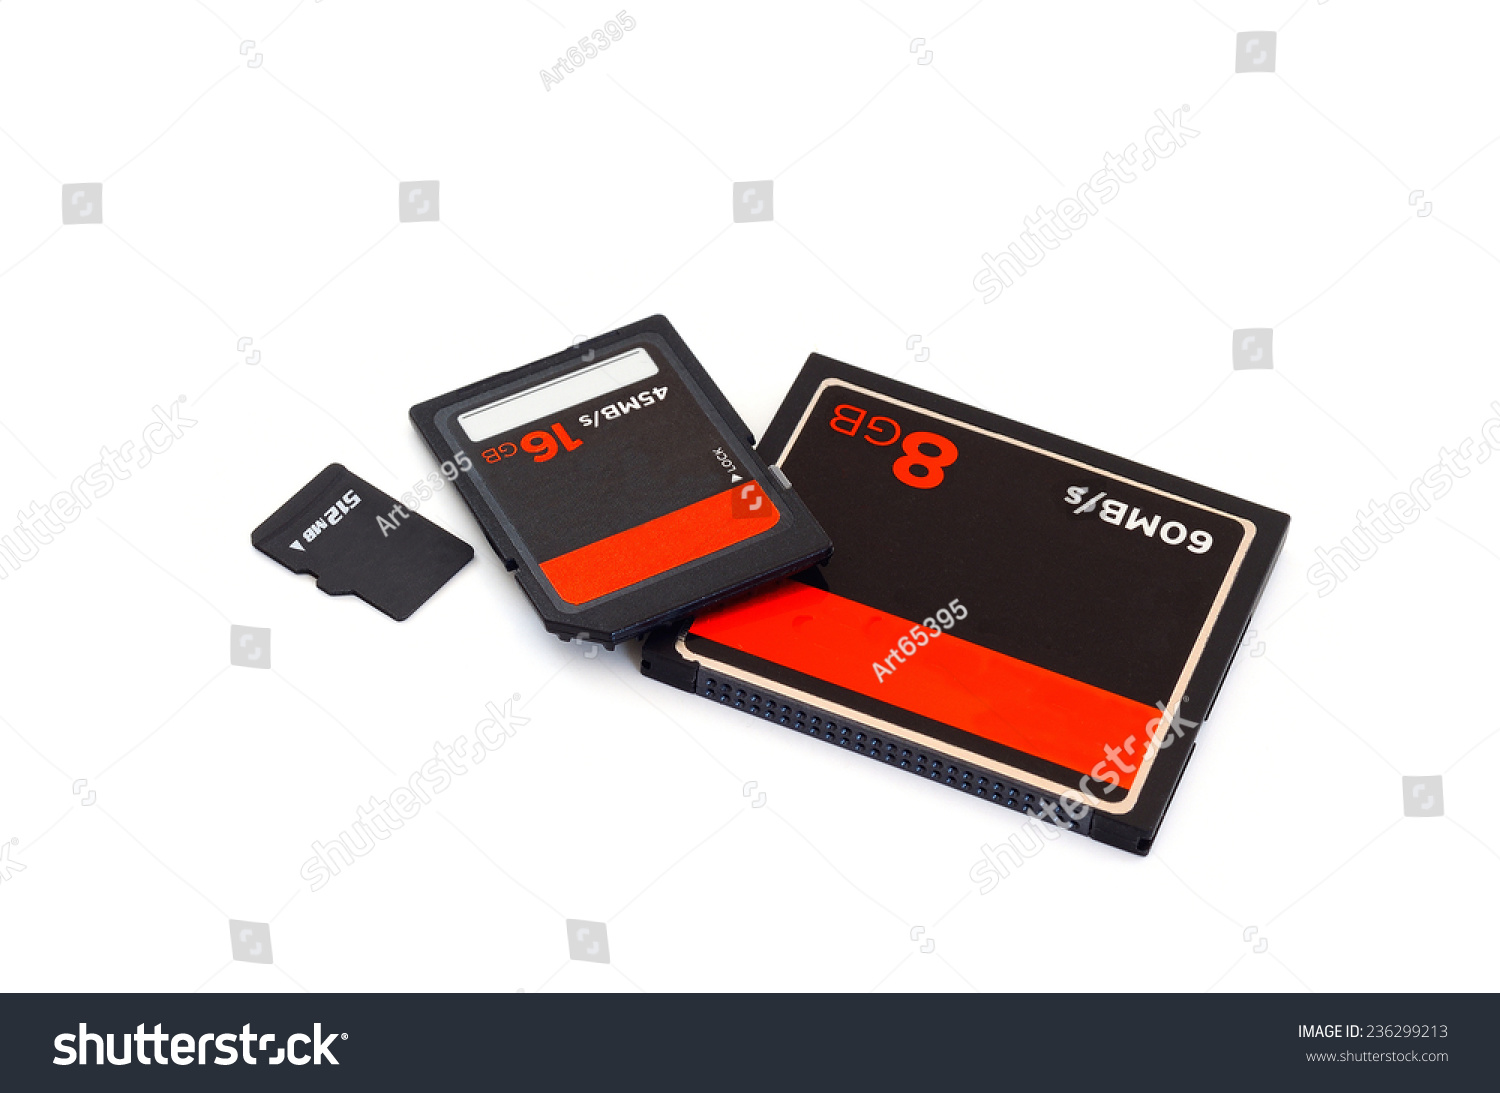 SD card ,CF Card ,Compact flash card and micro SD card isolate on white background #236299213